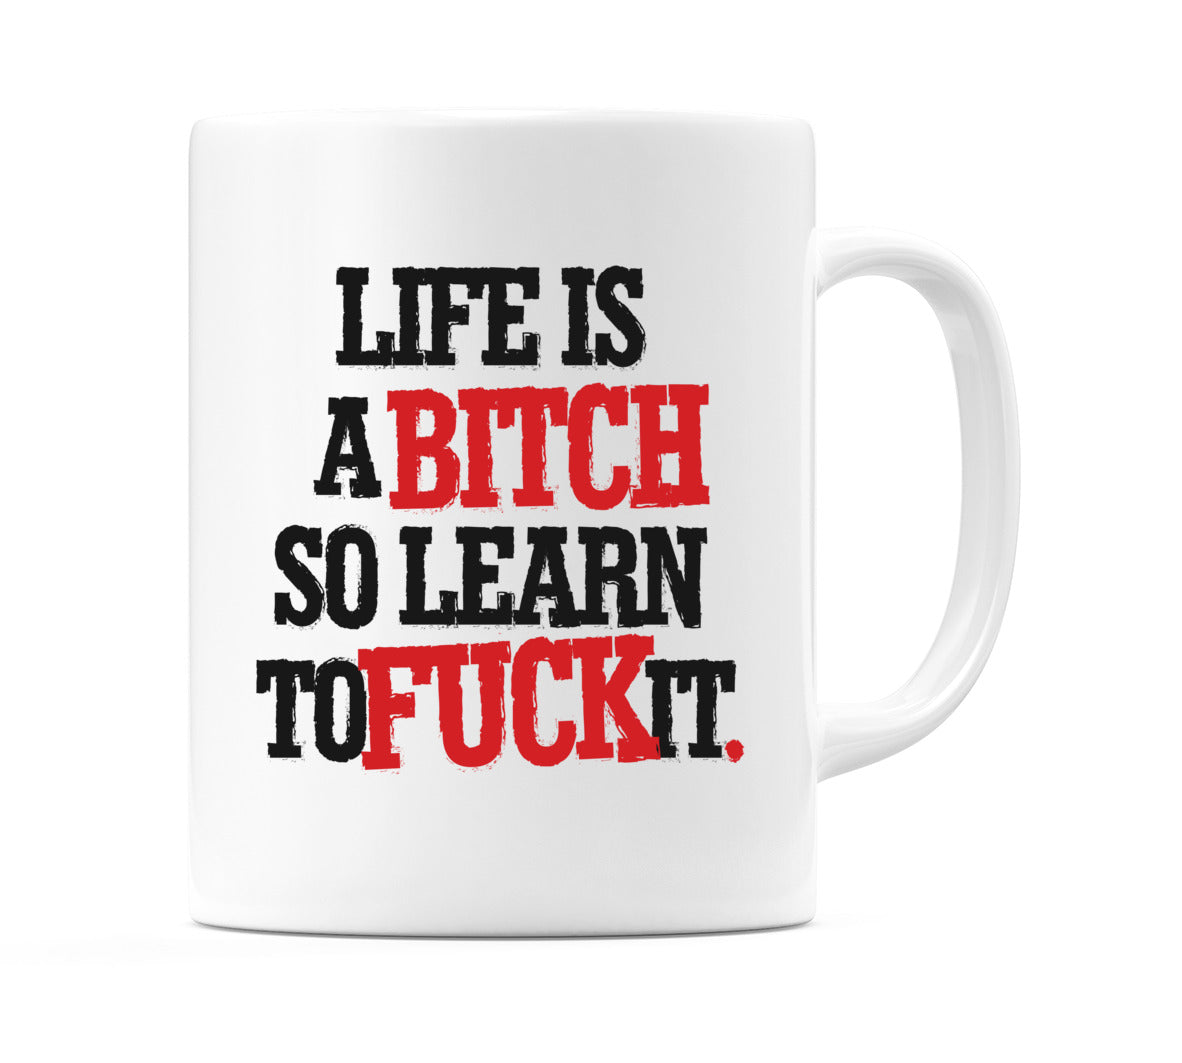 Life Is a Bitch So Learn To F*Ck It. Mug